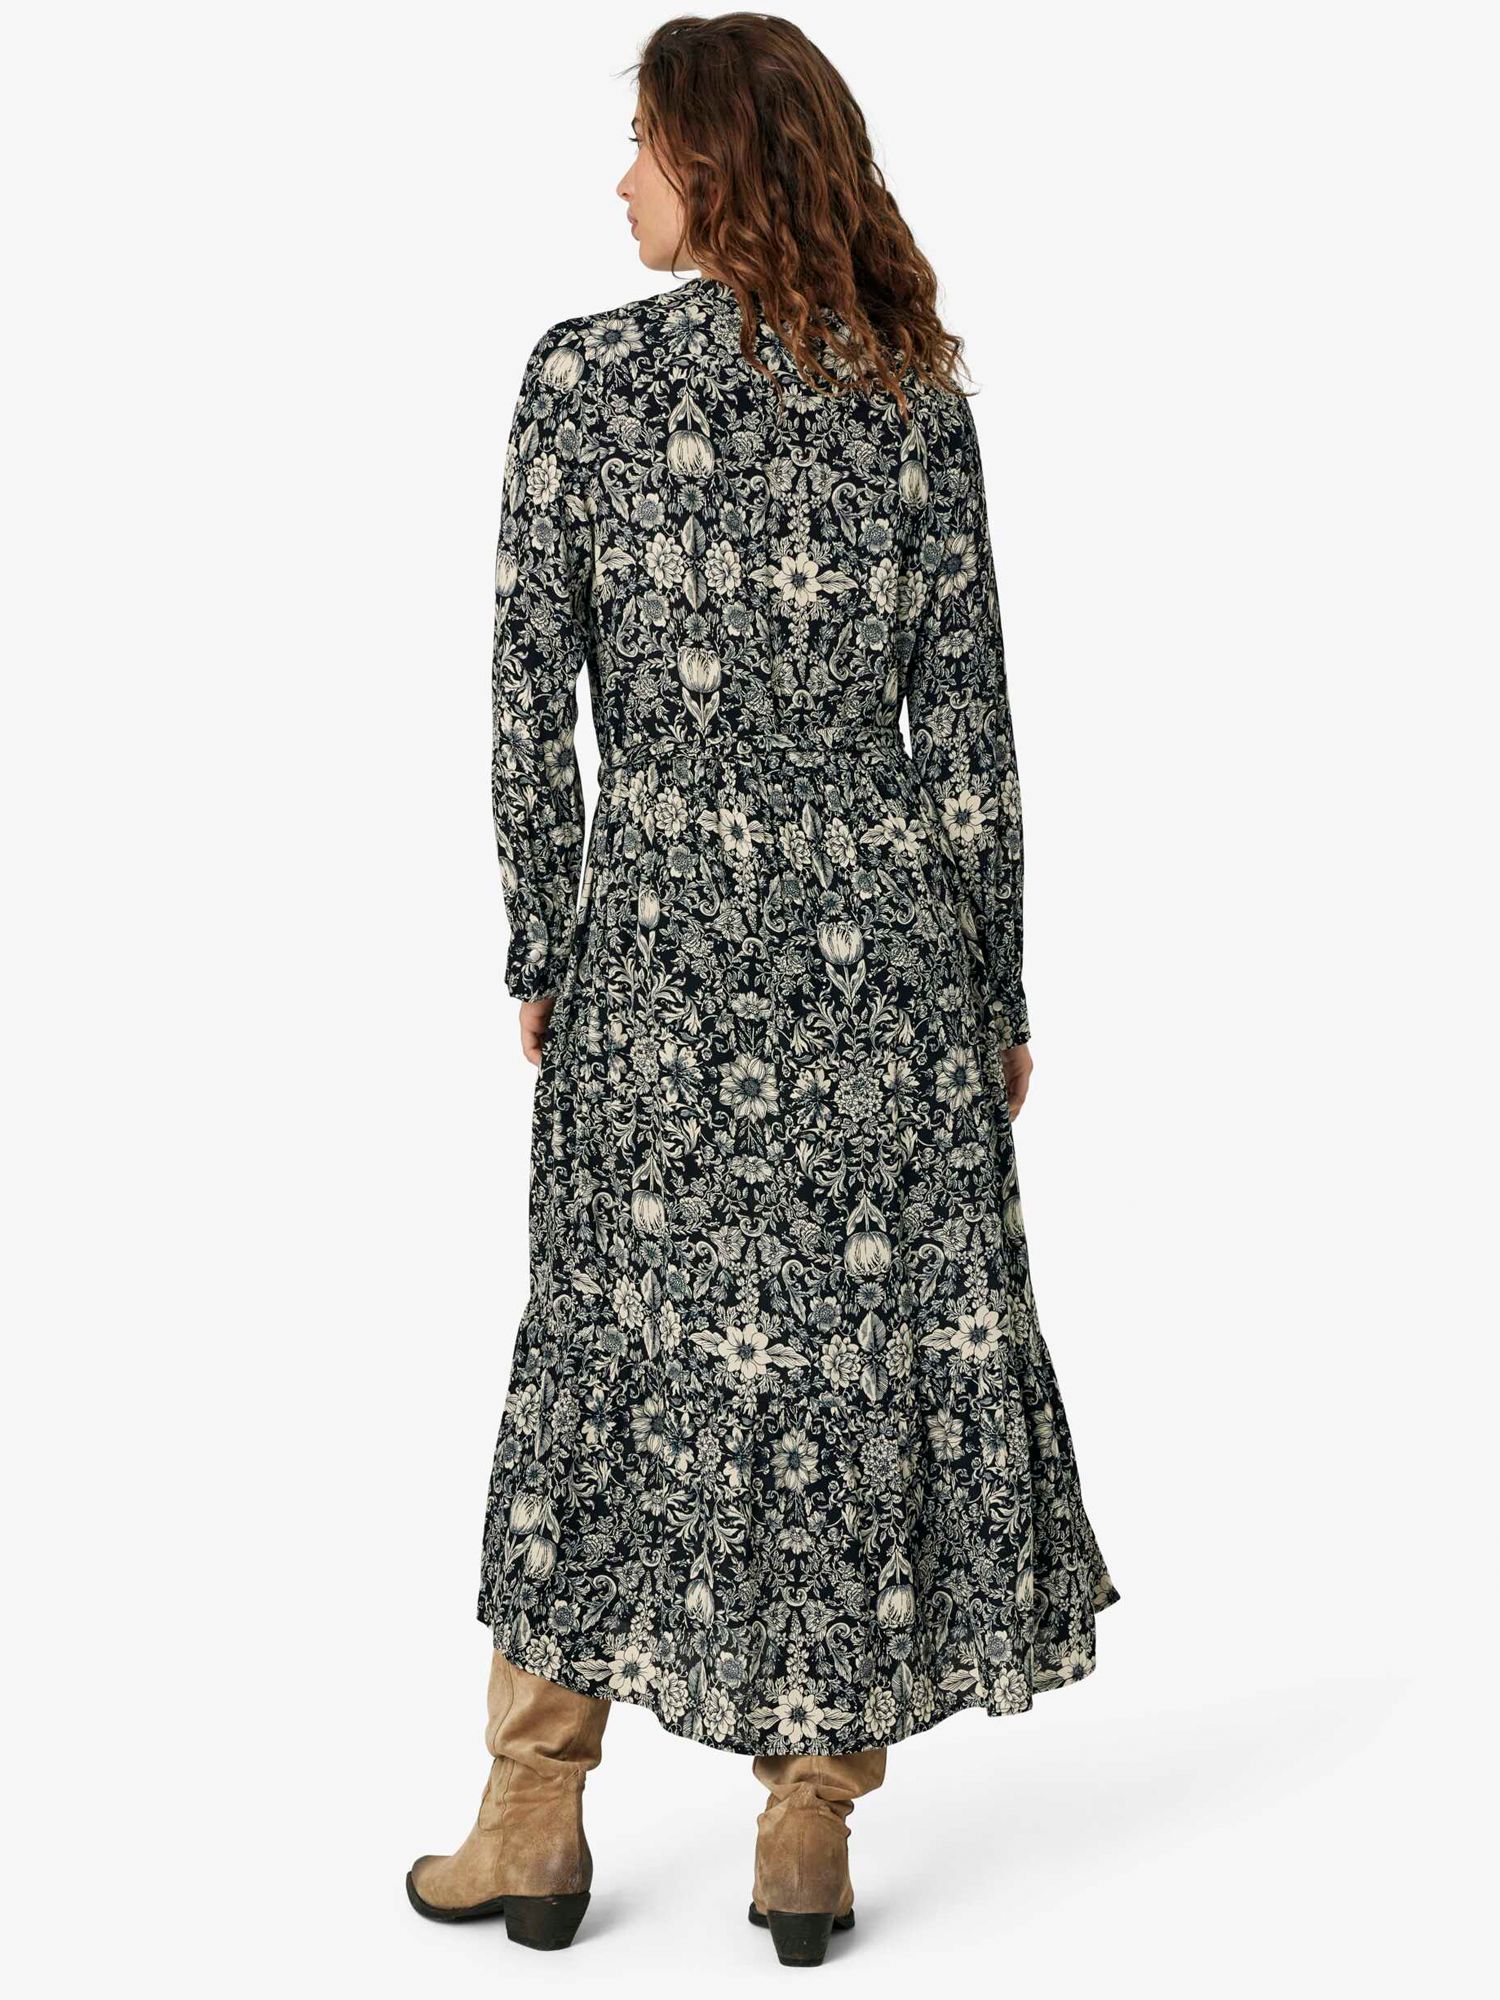 Noa Noa Louise Floral Tapestry Print Tiered Maxi Dress, Black/Off White ...